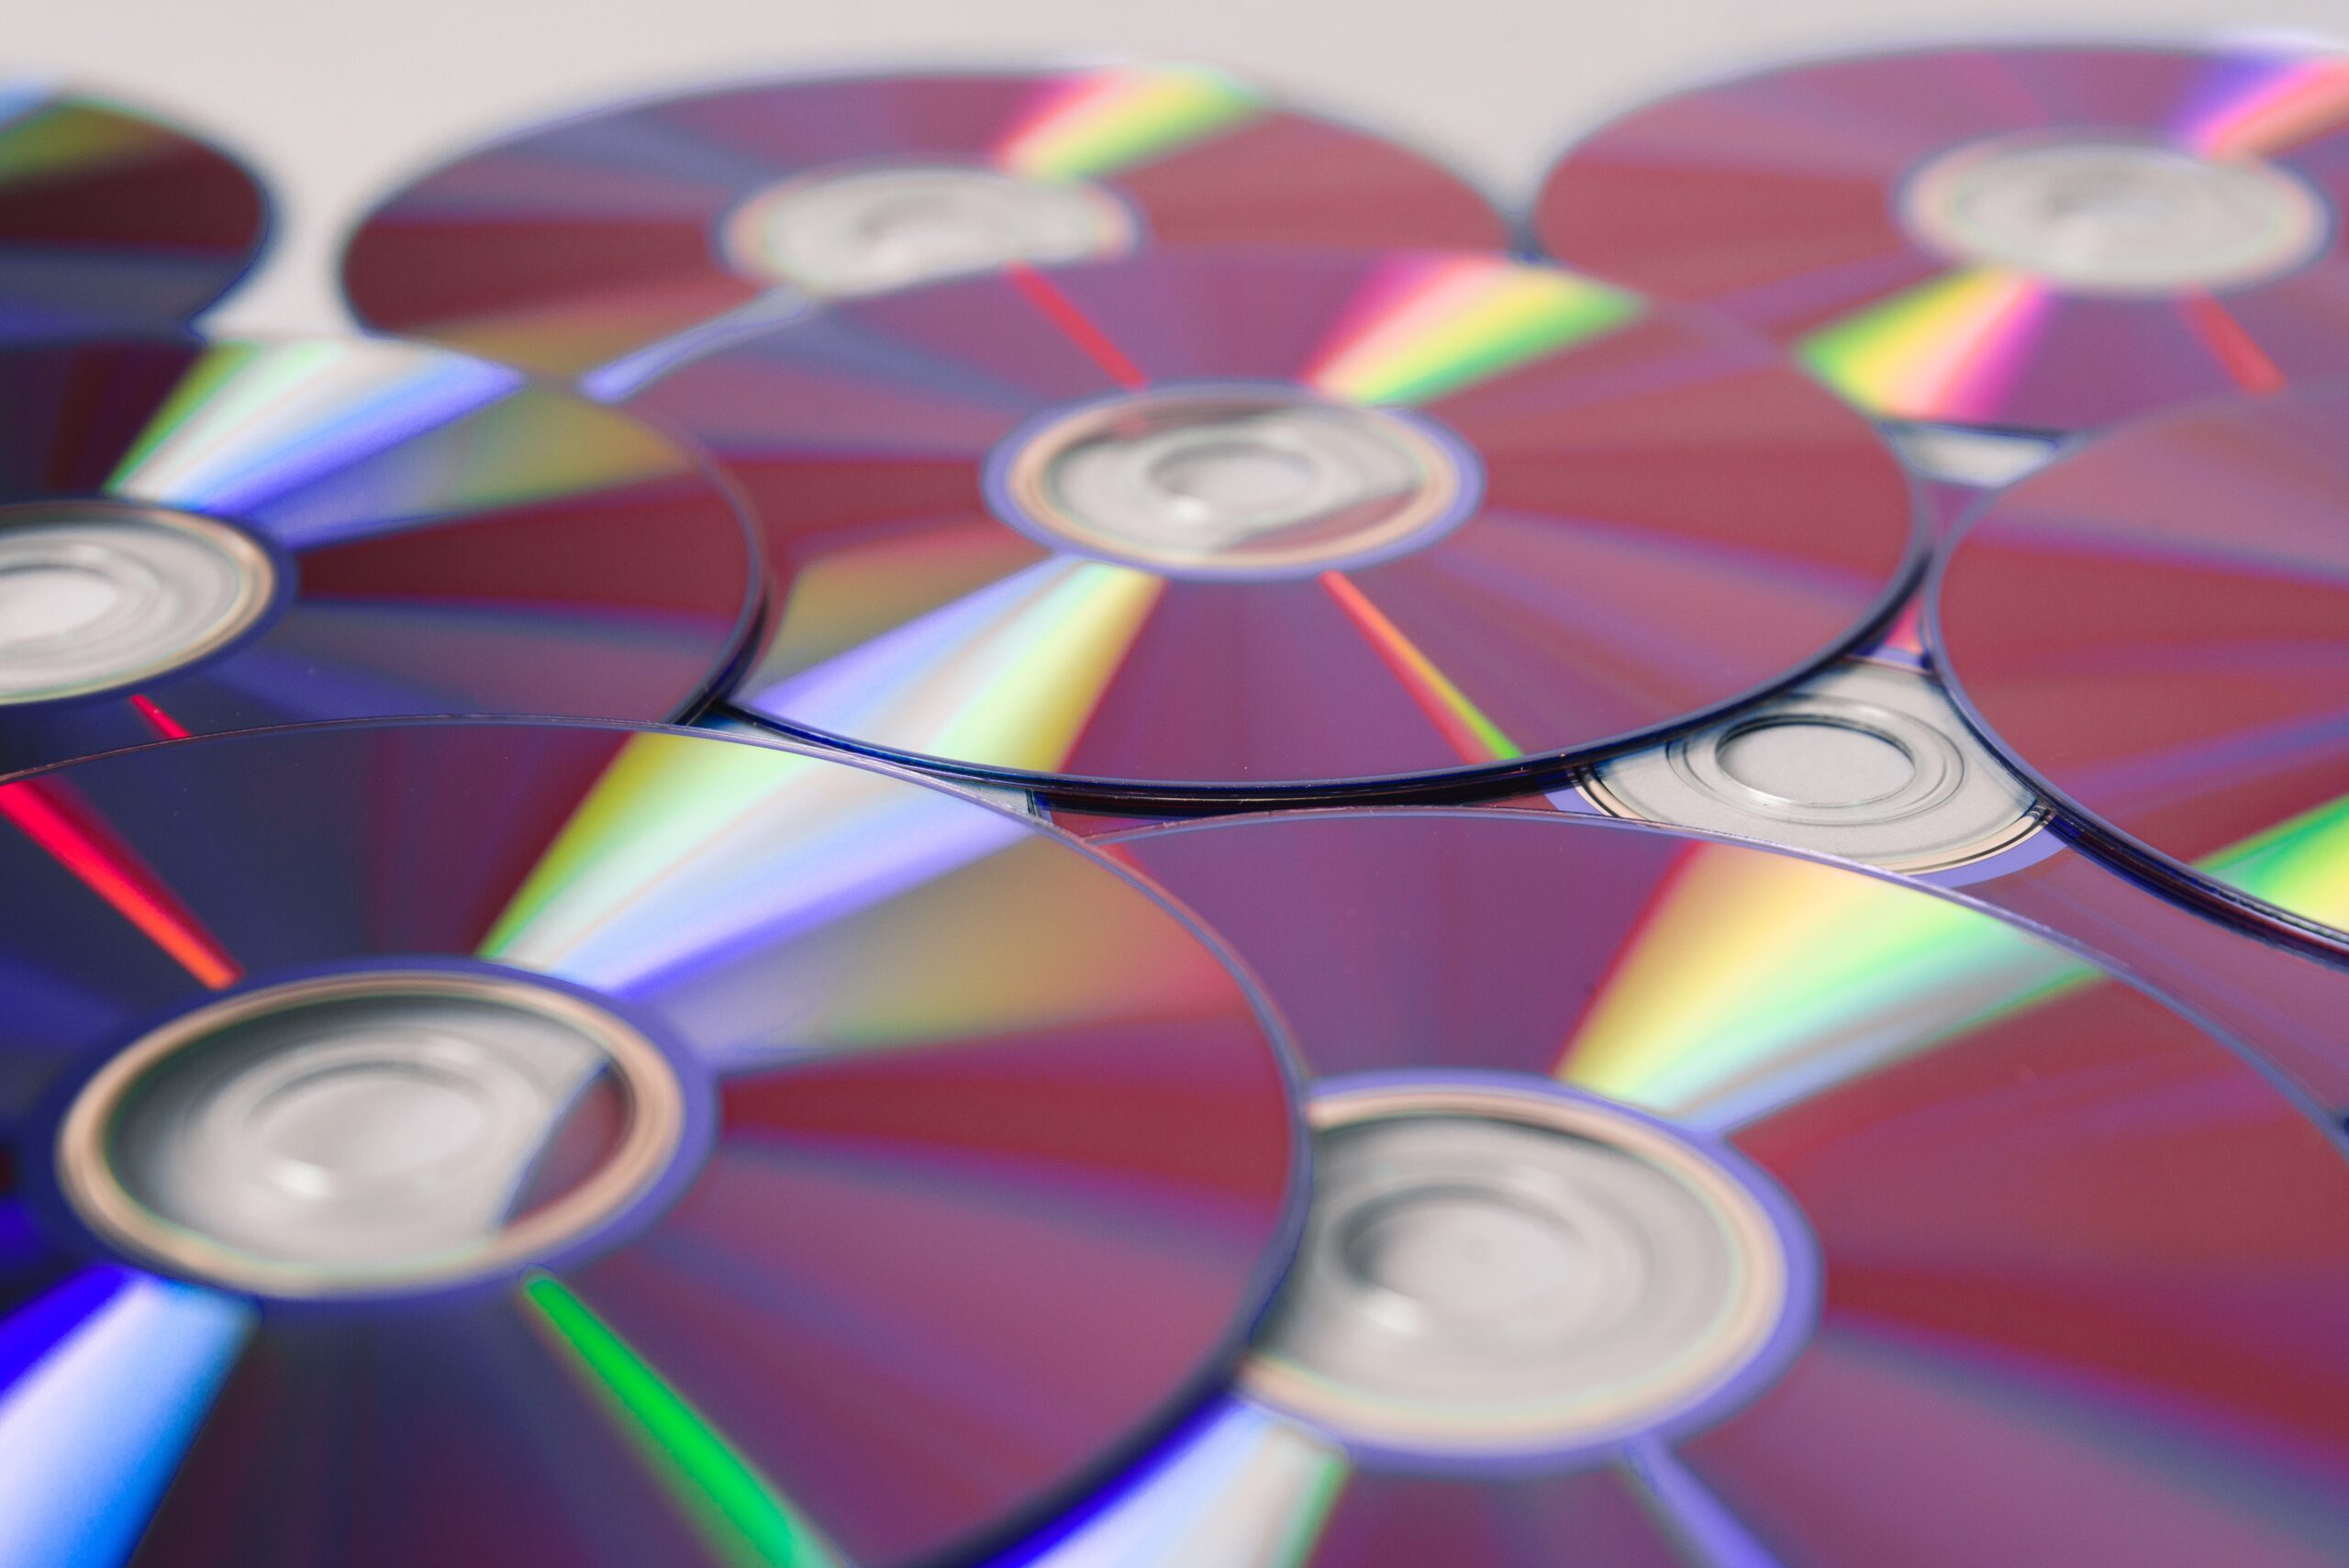 How to burn dvd with windows 10 